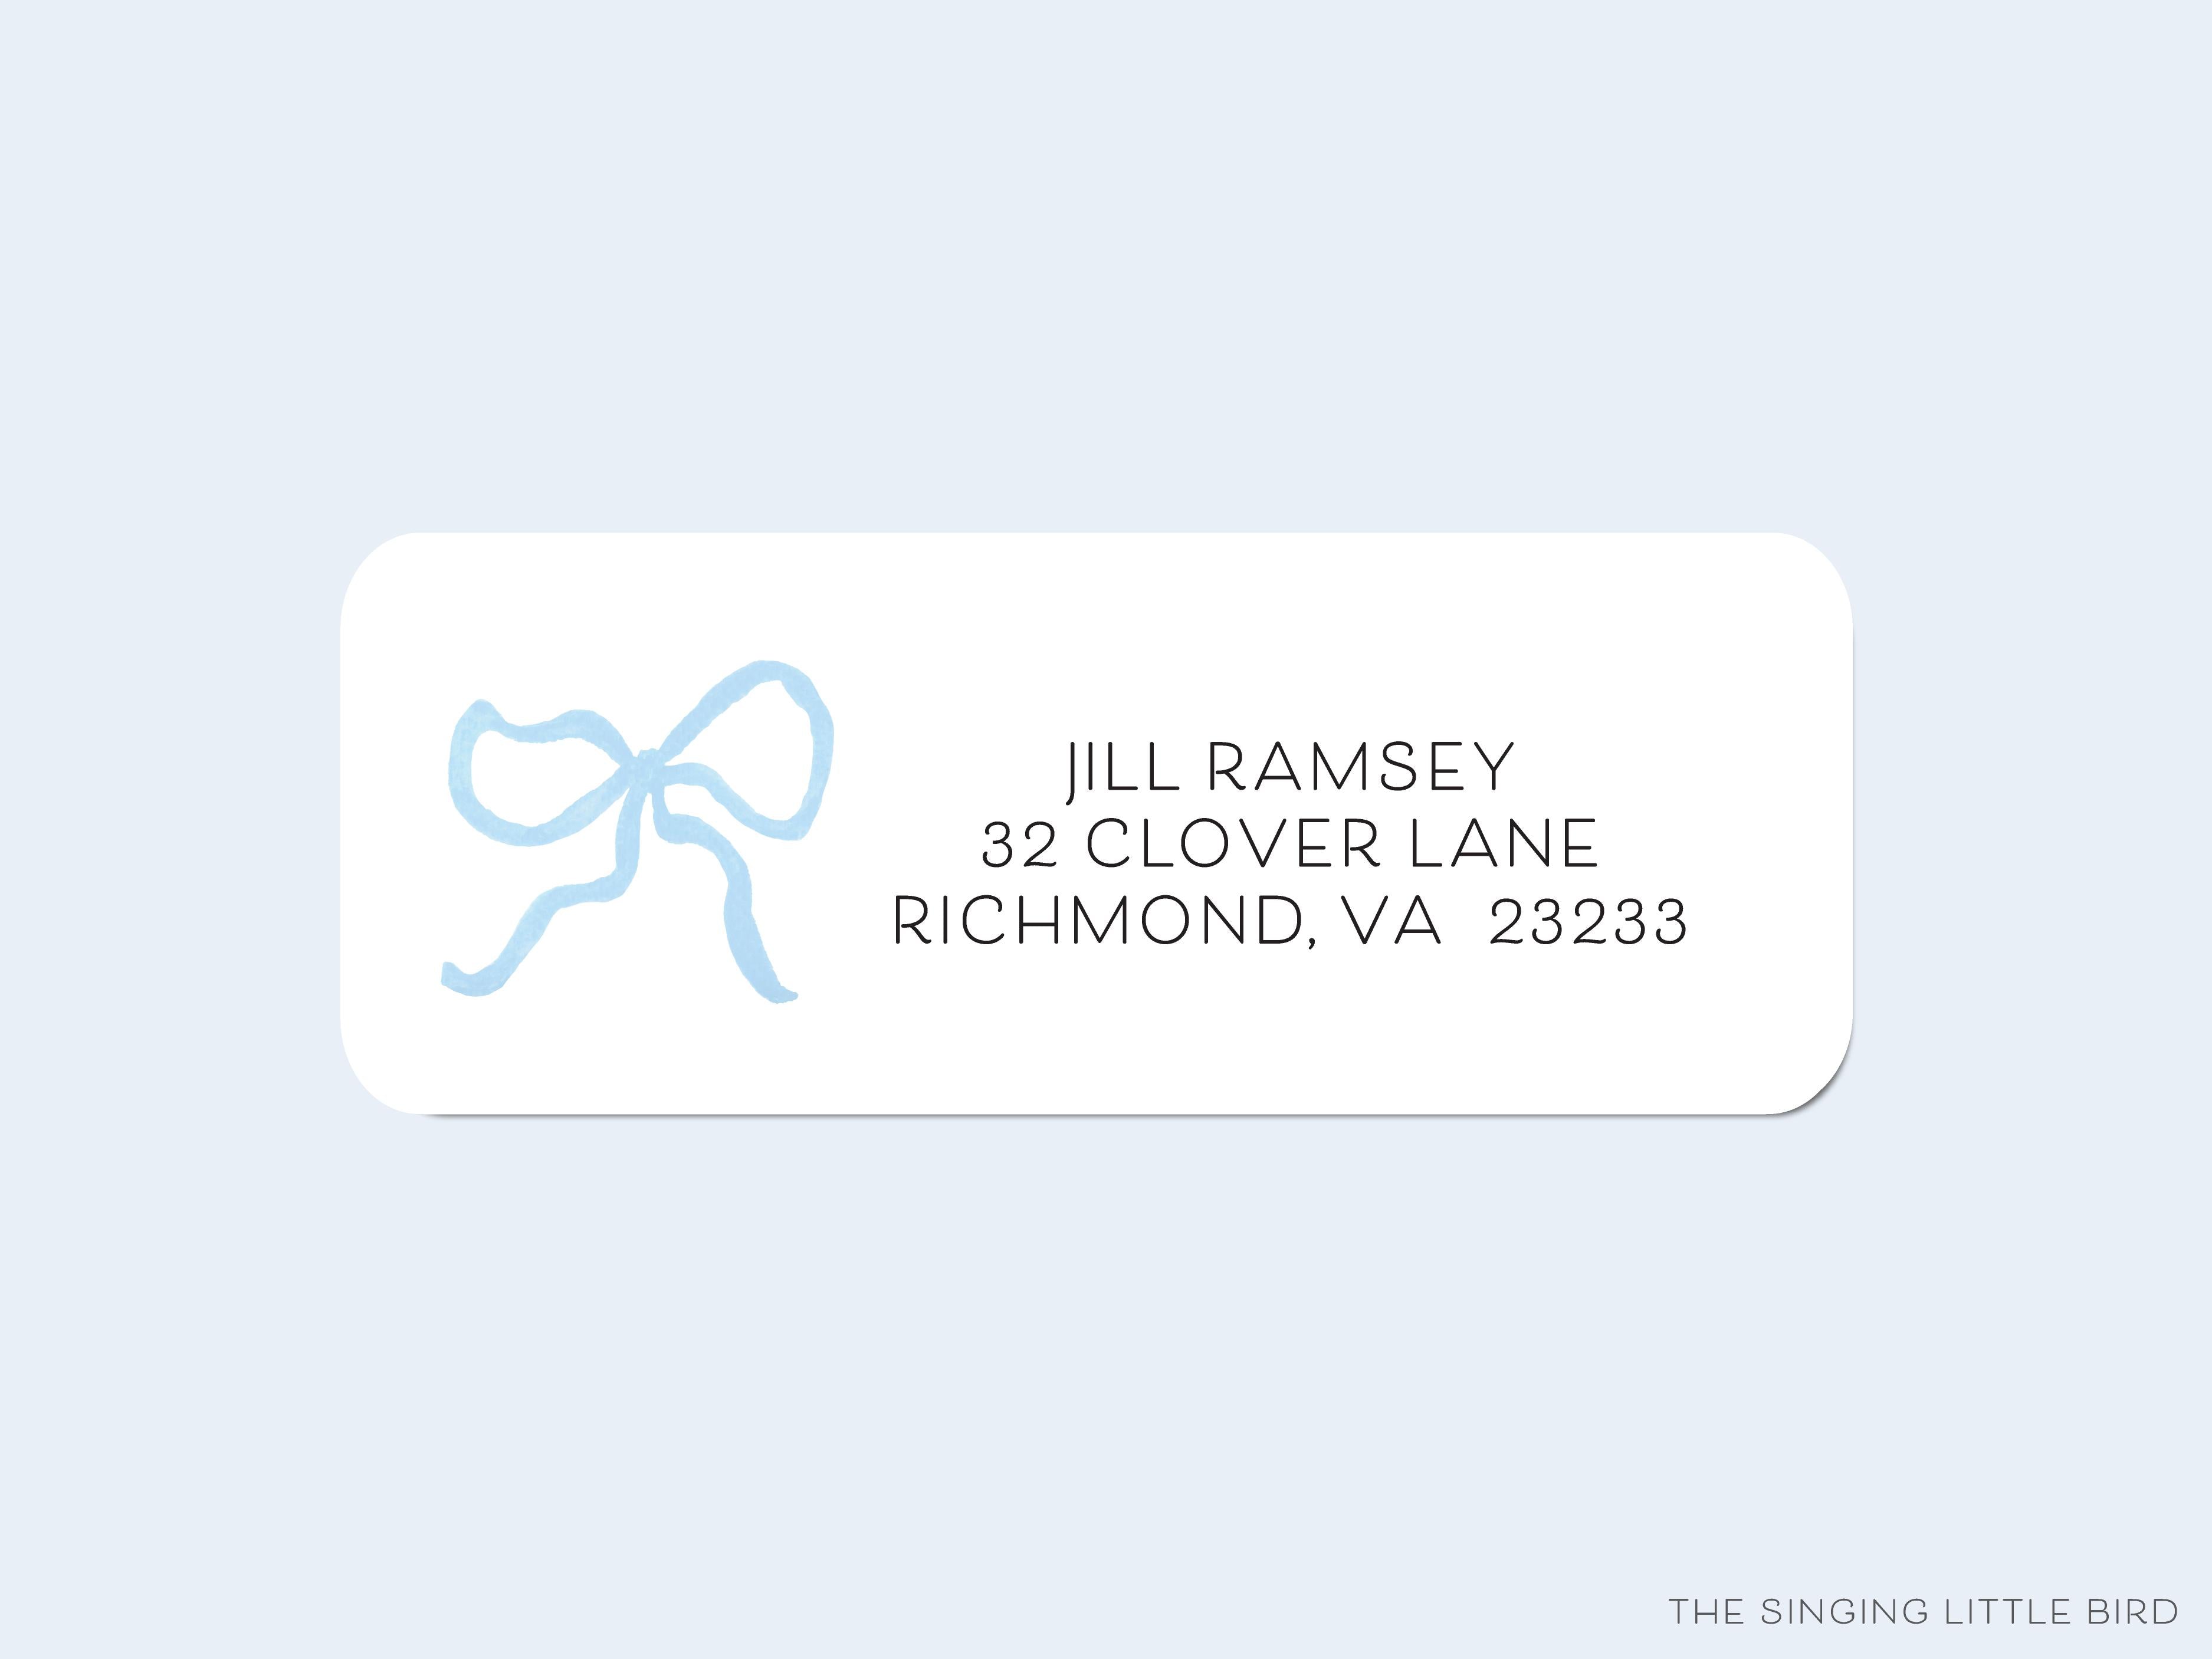 Light Blue Bow Return Address Labels-These personalized return address labels are 2.625" x 1" and feature our hand-painted watercolor bow, printed in the USA on beautiful matte finish labels. These make great gifts for yourself or the bow lover.-The Singing Little Bird